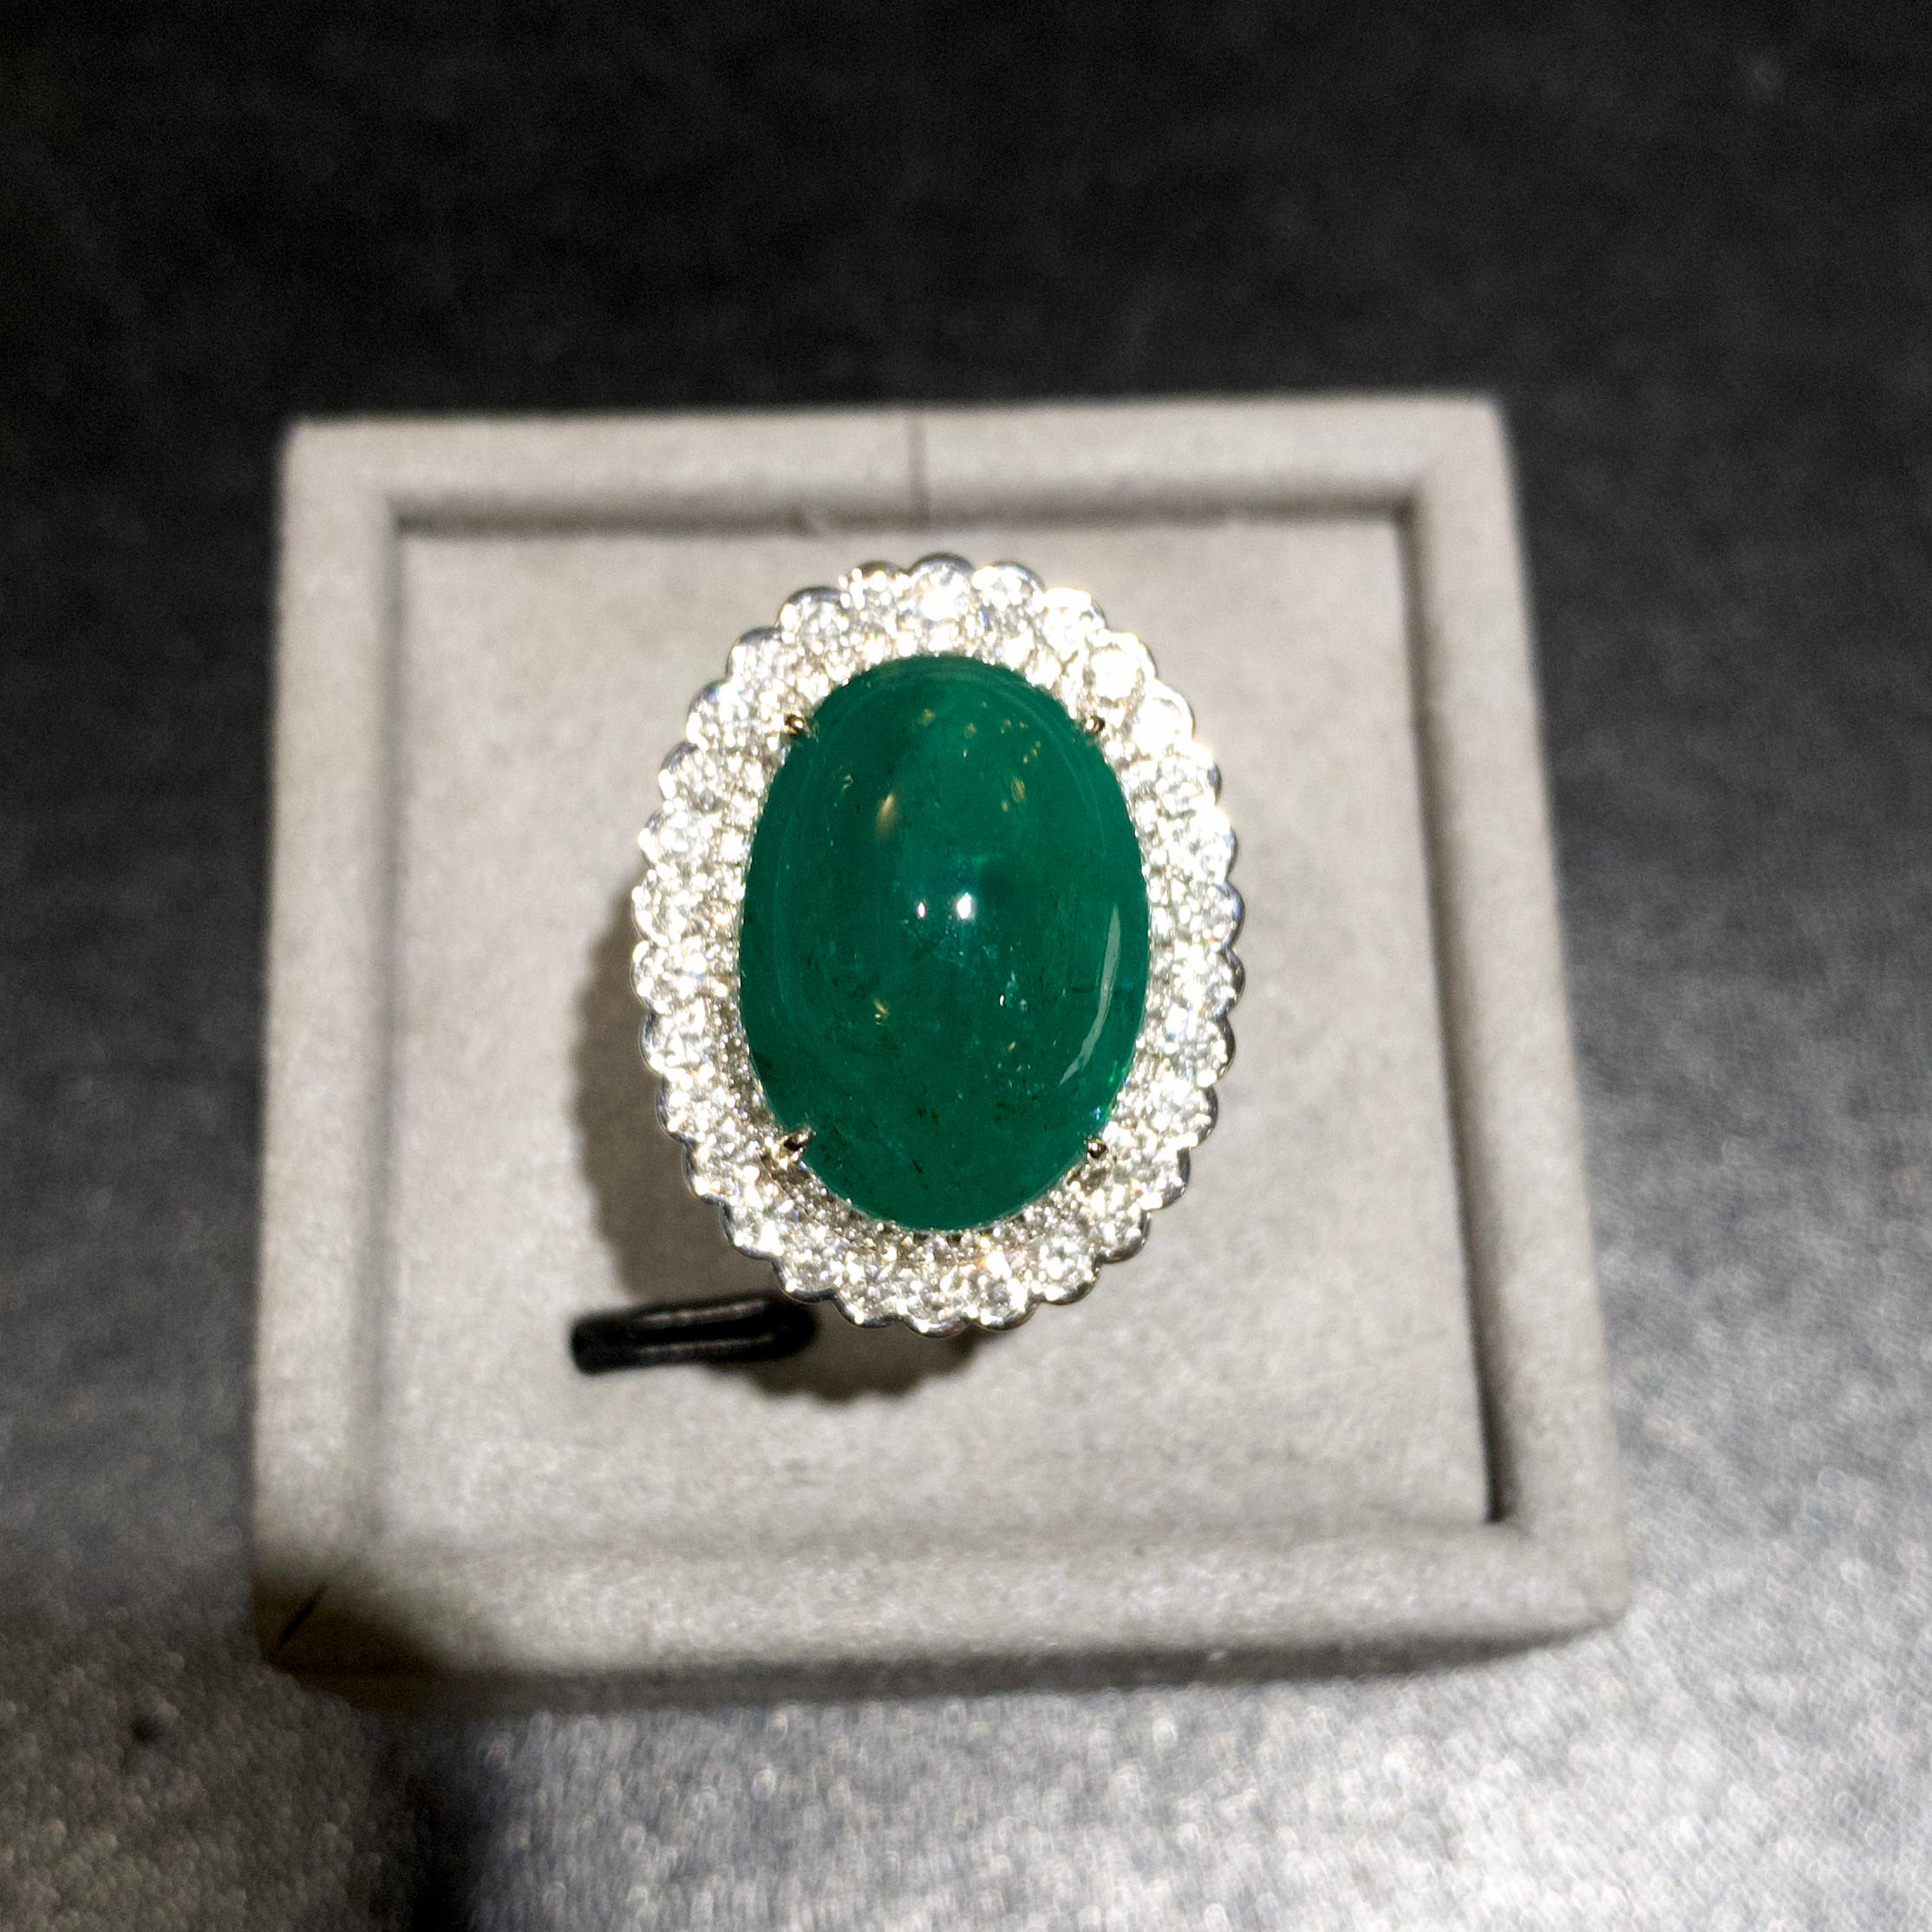 Emerald Cabochon 15.48Ct Muzo Coloor And Diamond Ring In 18K Gold 

Main Emerald weight is 15.48ct and has Minor Clarity Enhancement. The Colour of the Emerald is Vivid Green and is known in the trade as “Muzo Green”

Gemological testing revealed